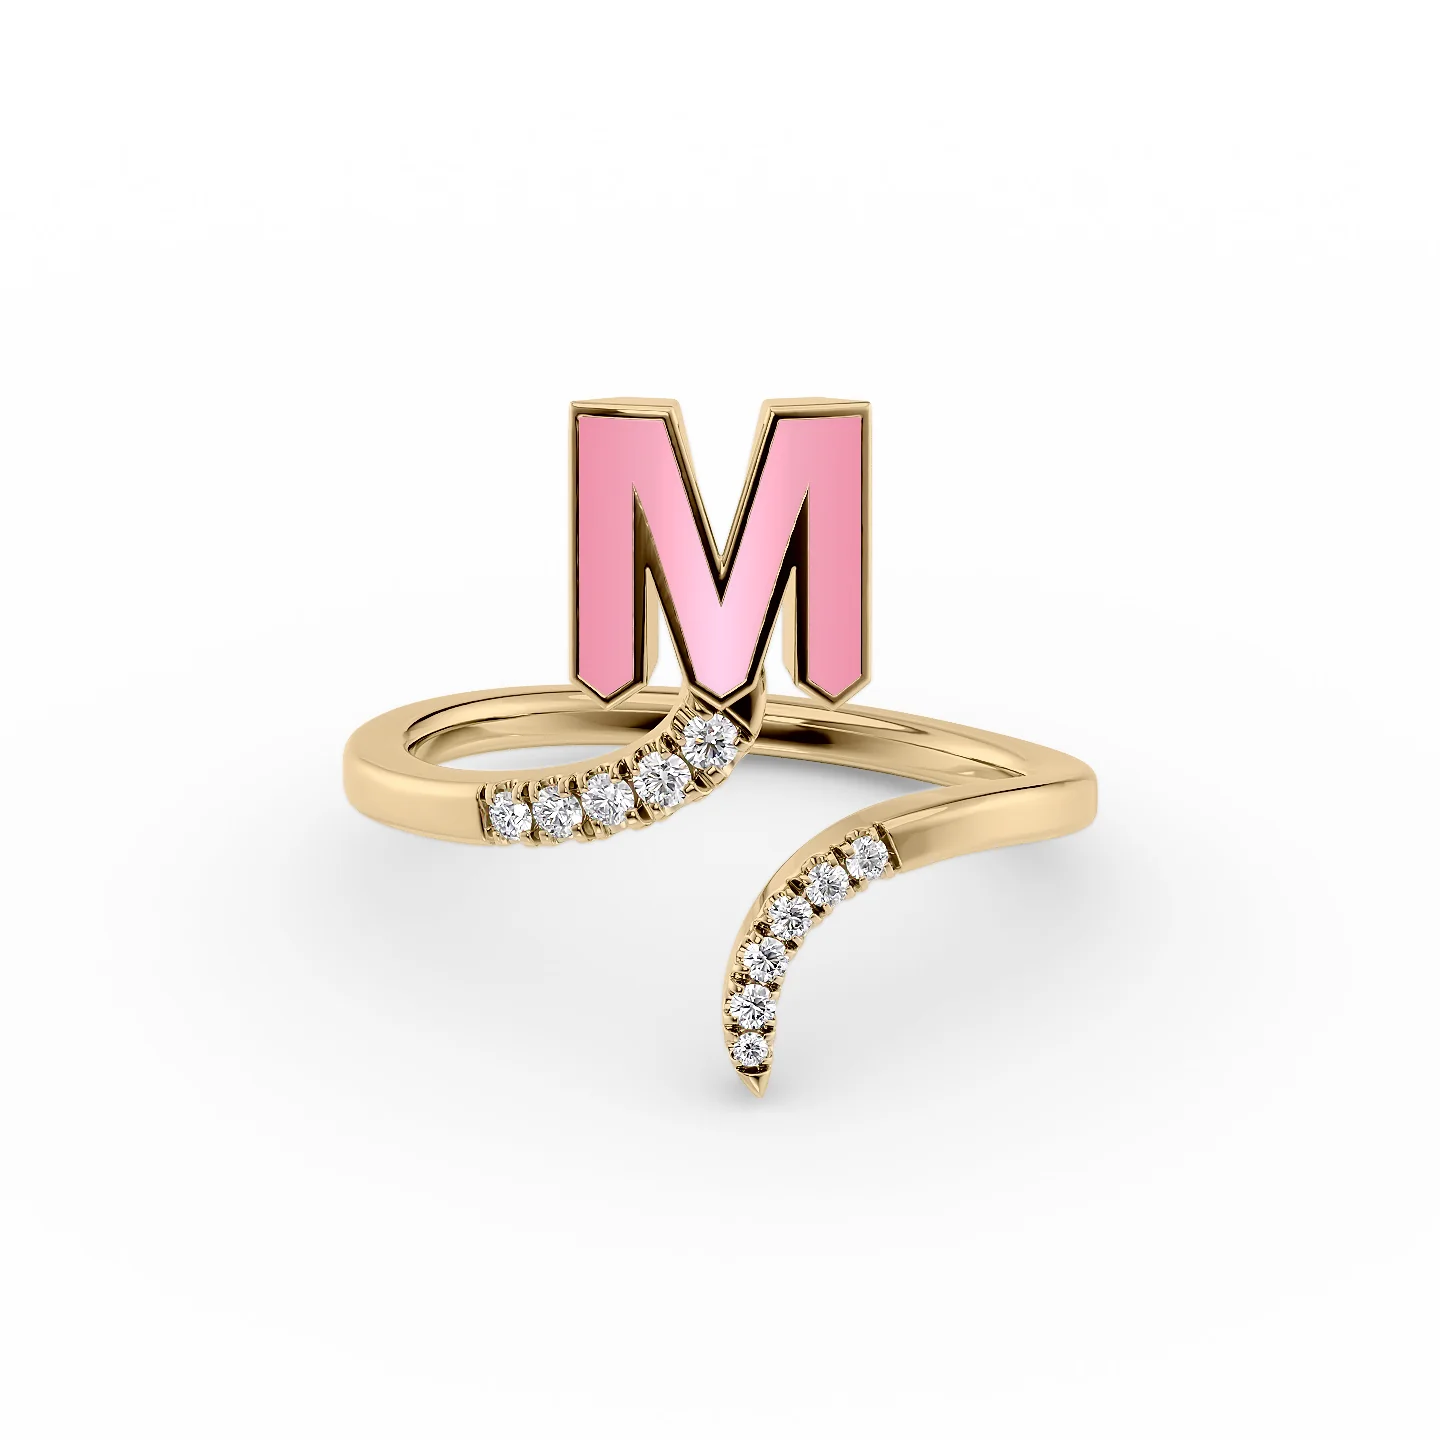 Rings Couple Initial | Initial Ring Letter Couple | Ring Letter Jewelry -  26pcs A-z - Aliexpress